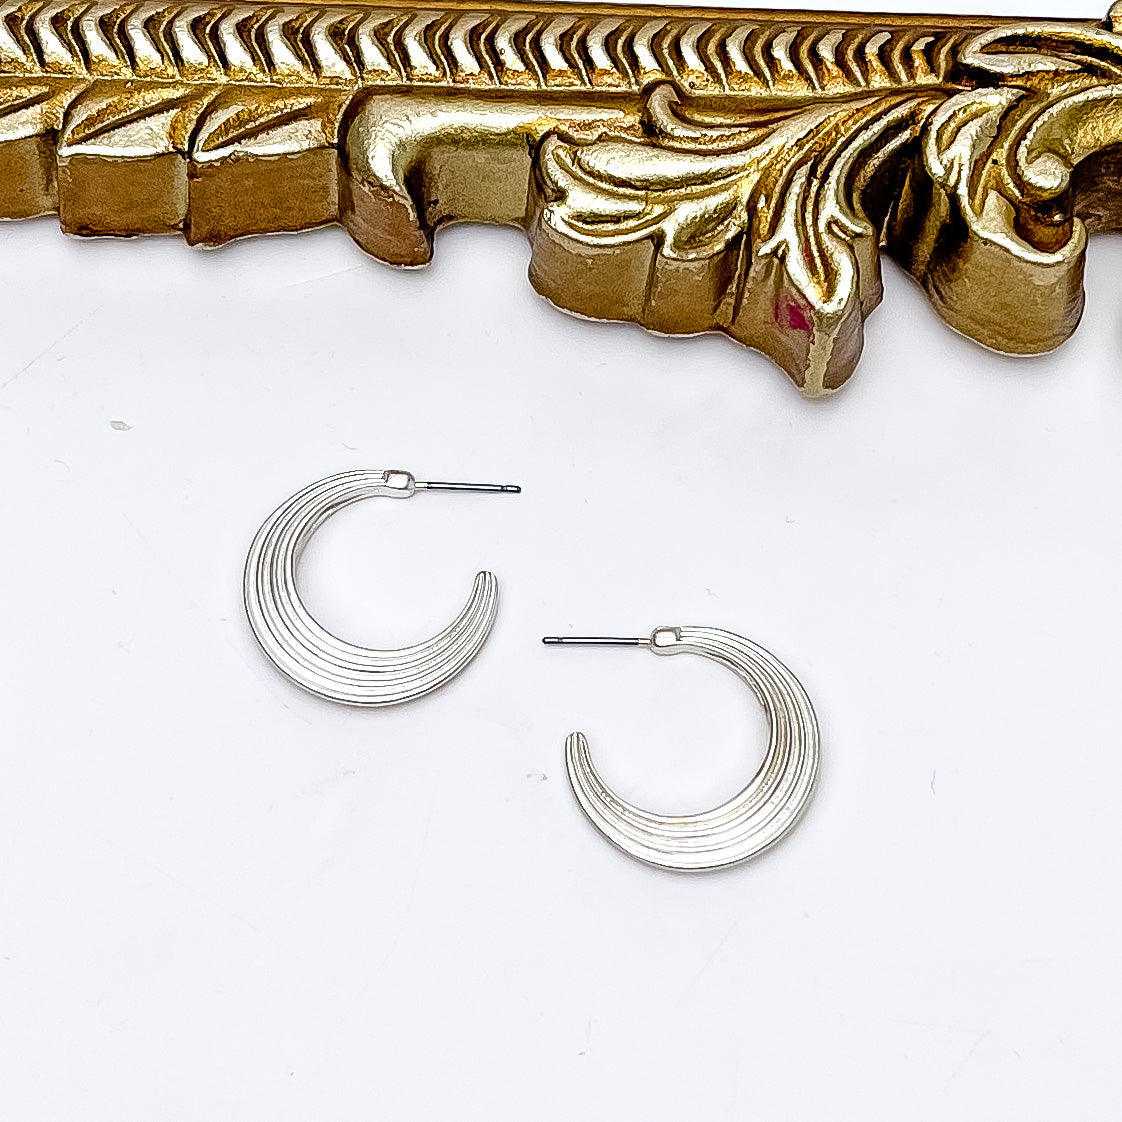 Livin' Life Silver Tone Small Hoop Earrings. Pictured on a white background with a gold frame above the earrings.